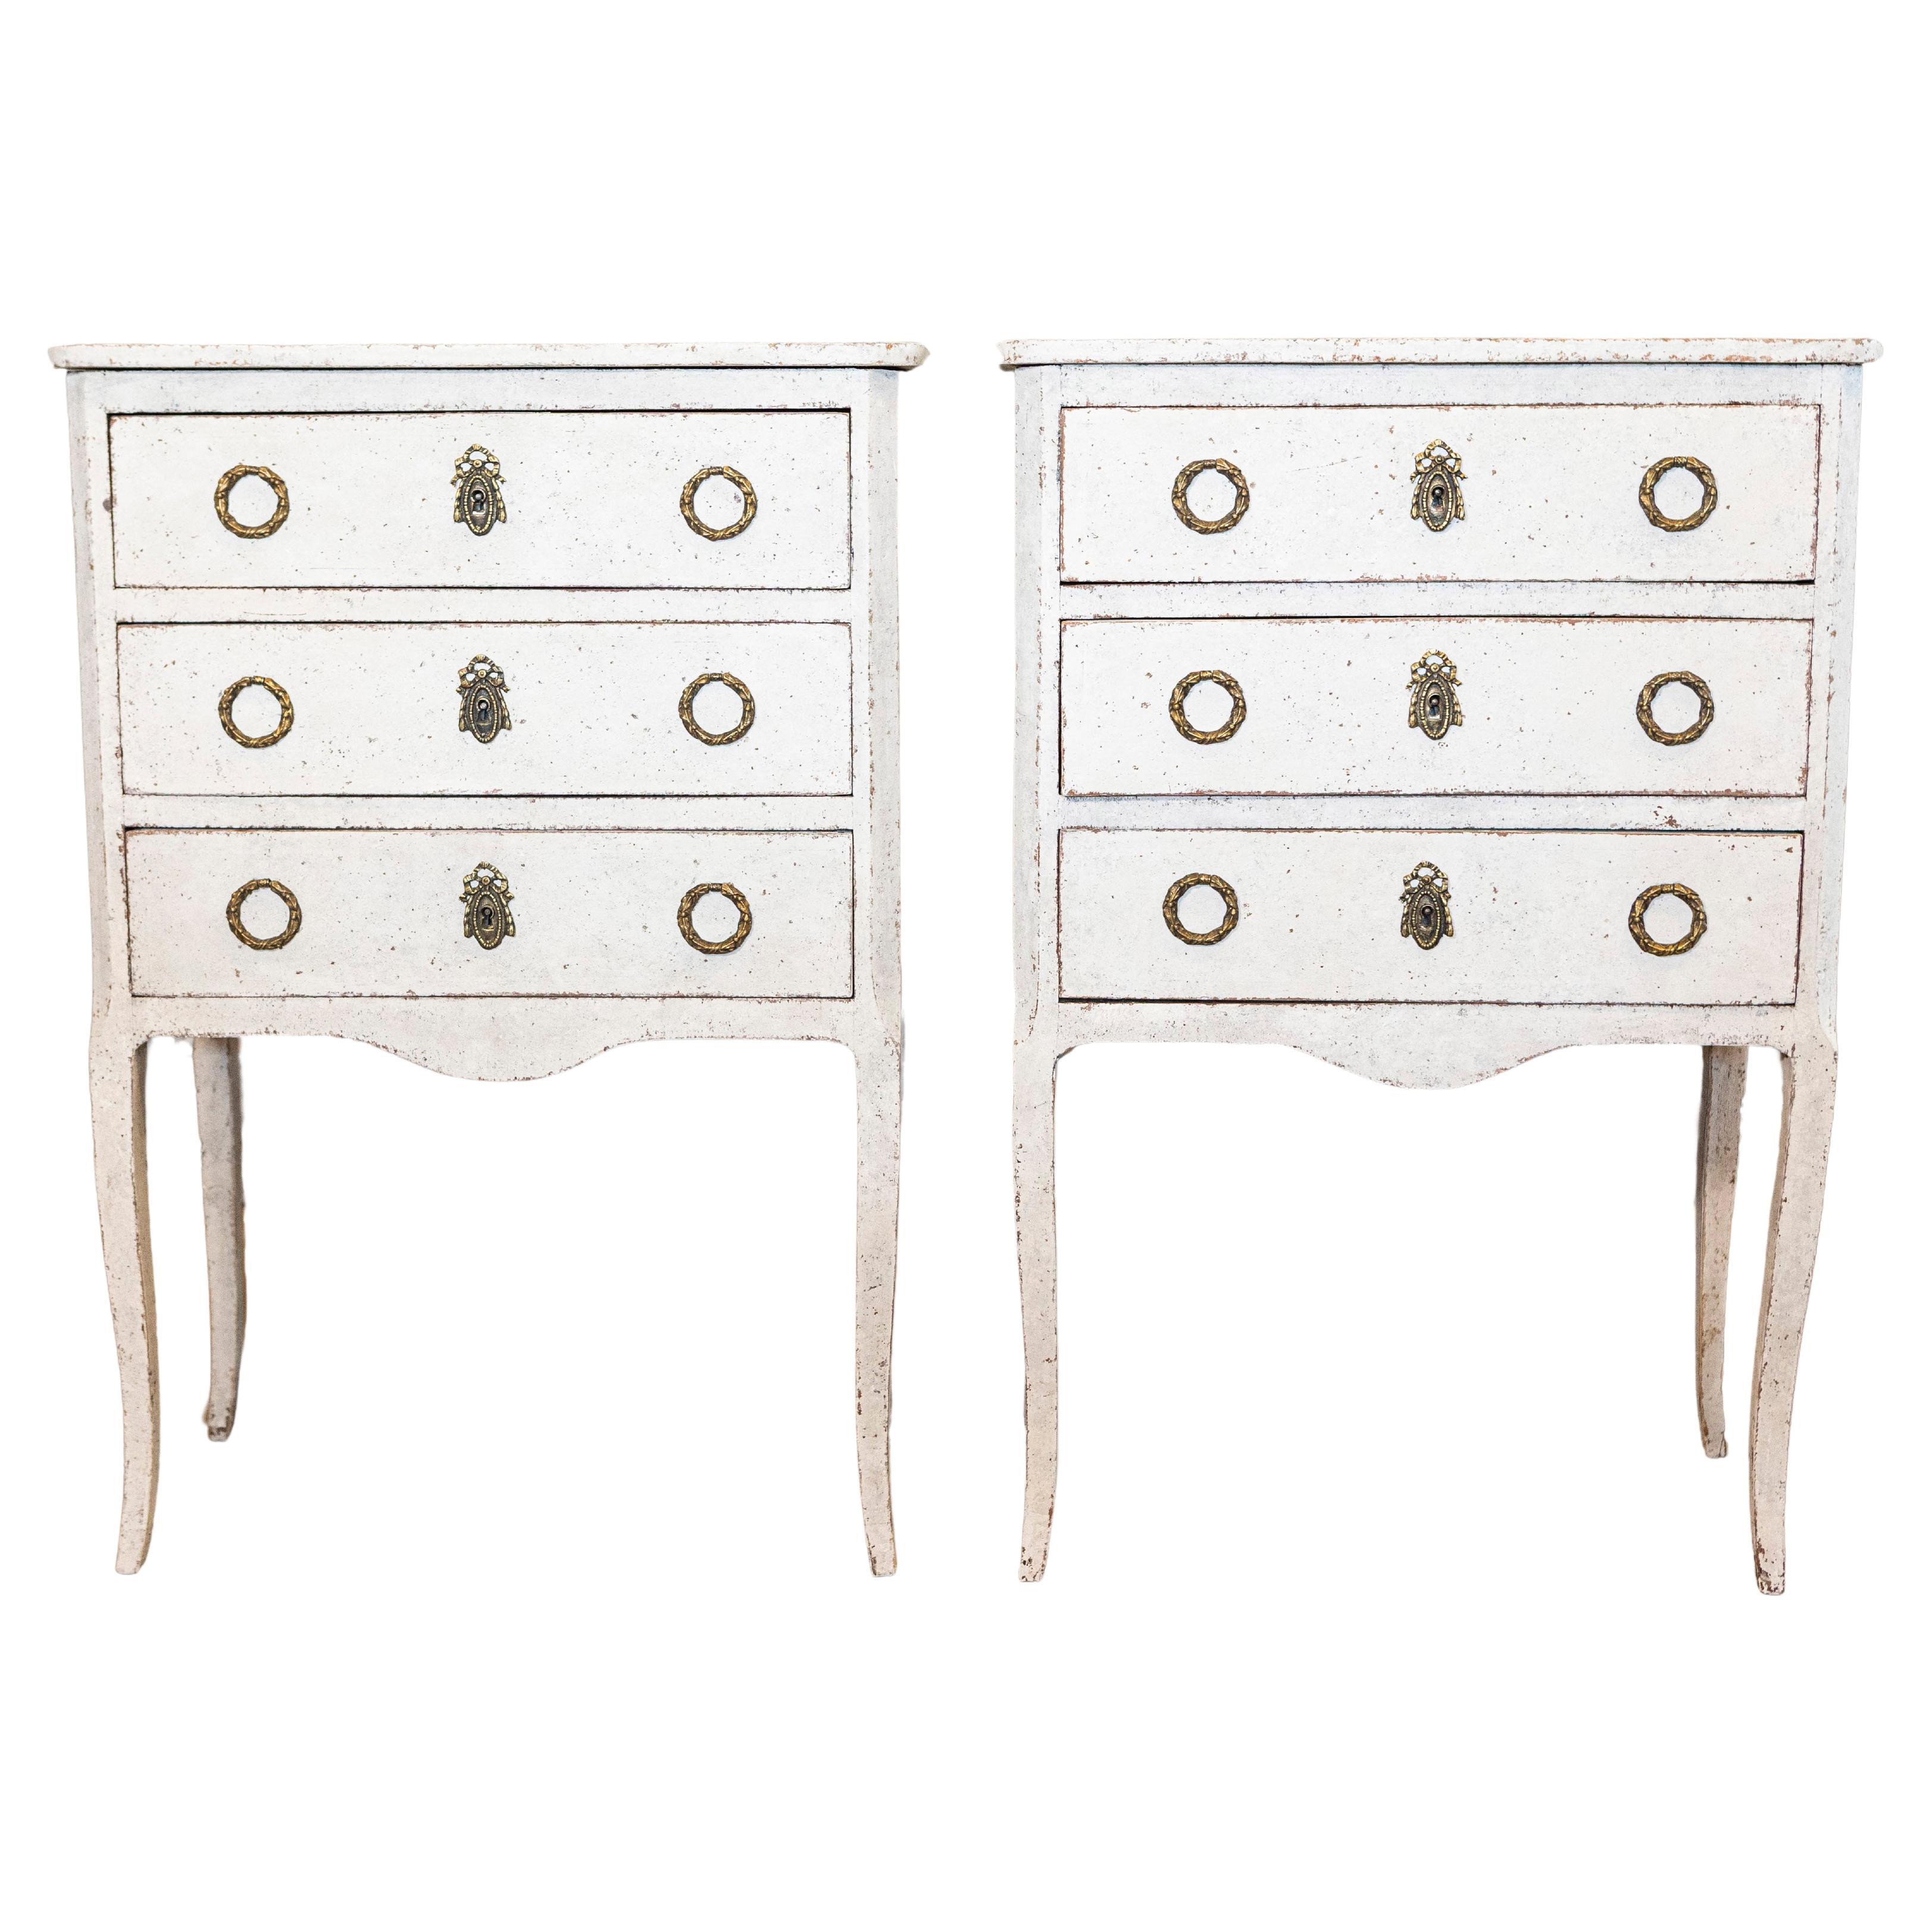 Swedish Gray Painted Bedside Tables with Three Drawers and Cabriole Legs, a Pair